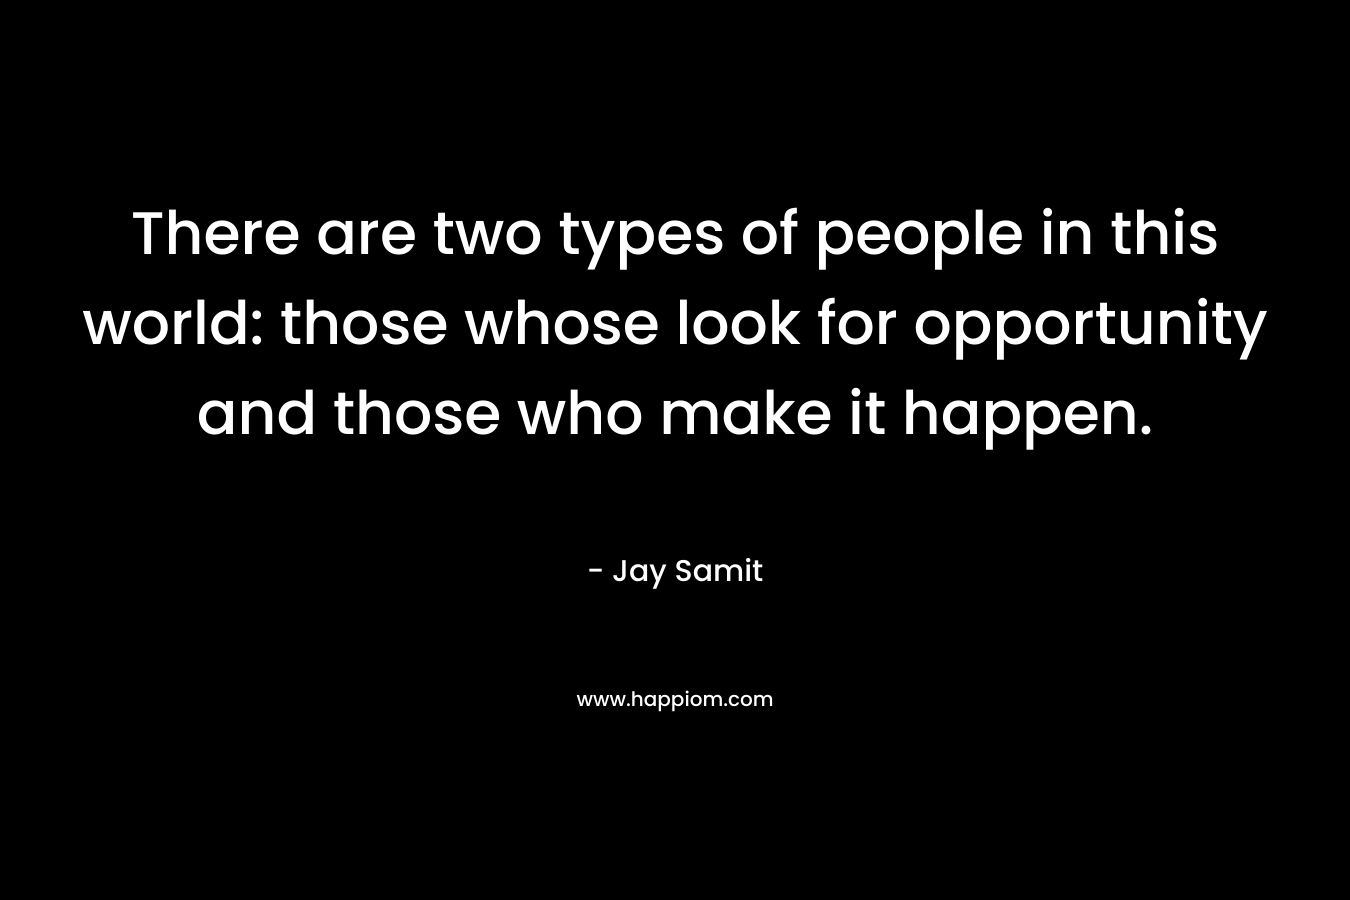 There are two types of people in this world: those whose look for opportunity and those who make it happen. – Jay Samit